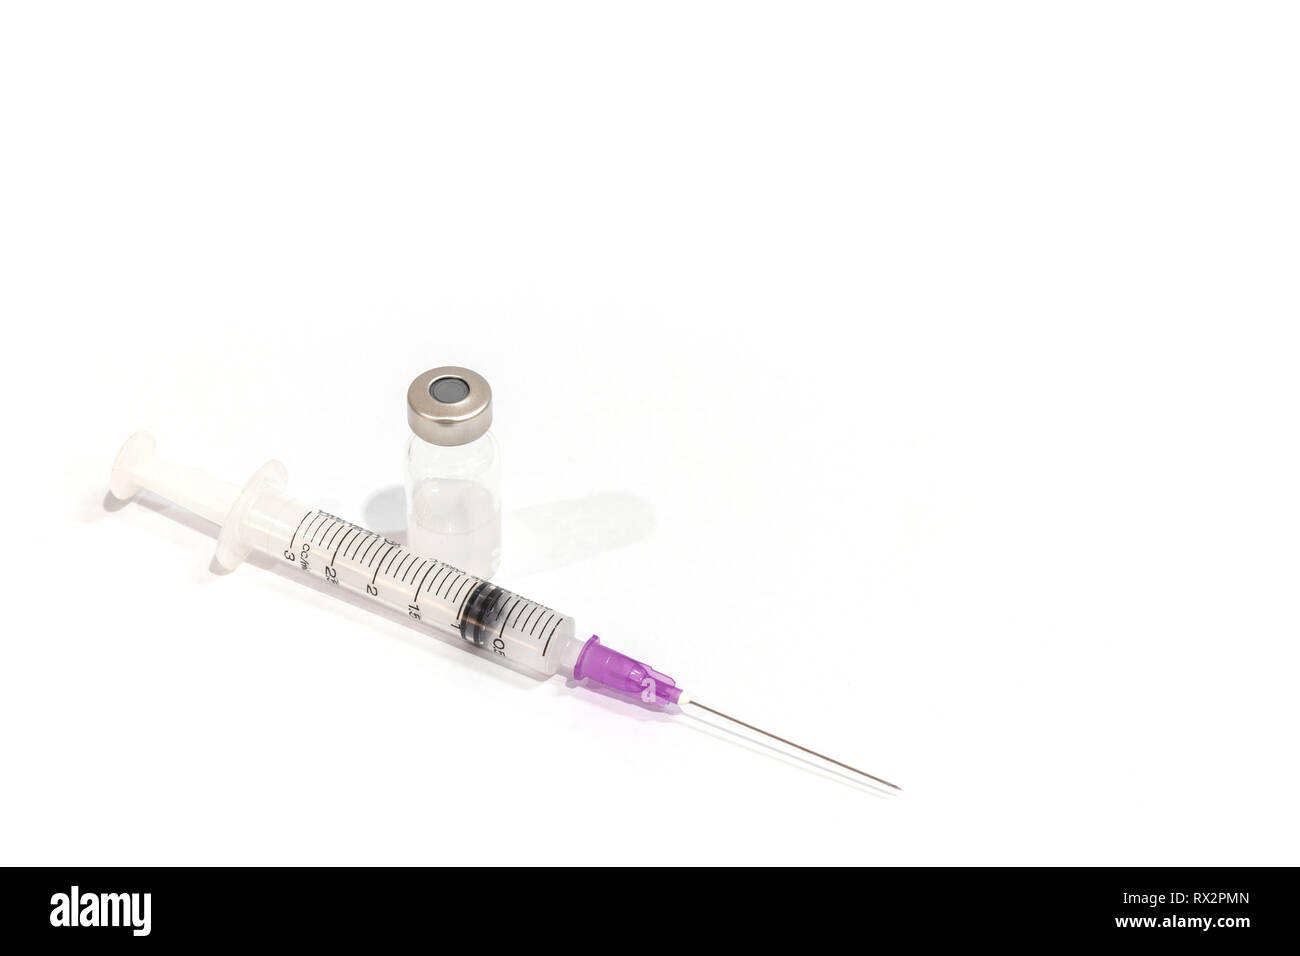 Vials with medication and injection needle isolated on white background. Stock Photo